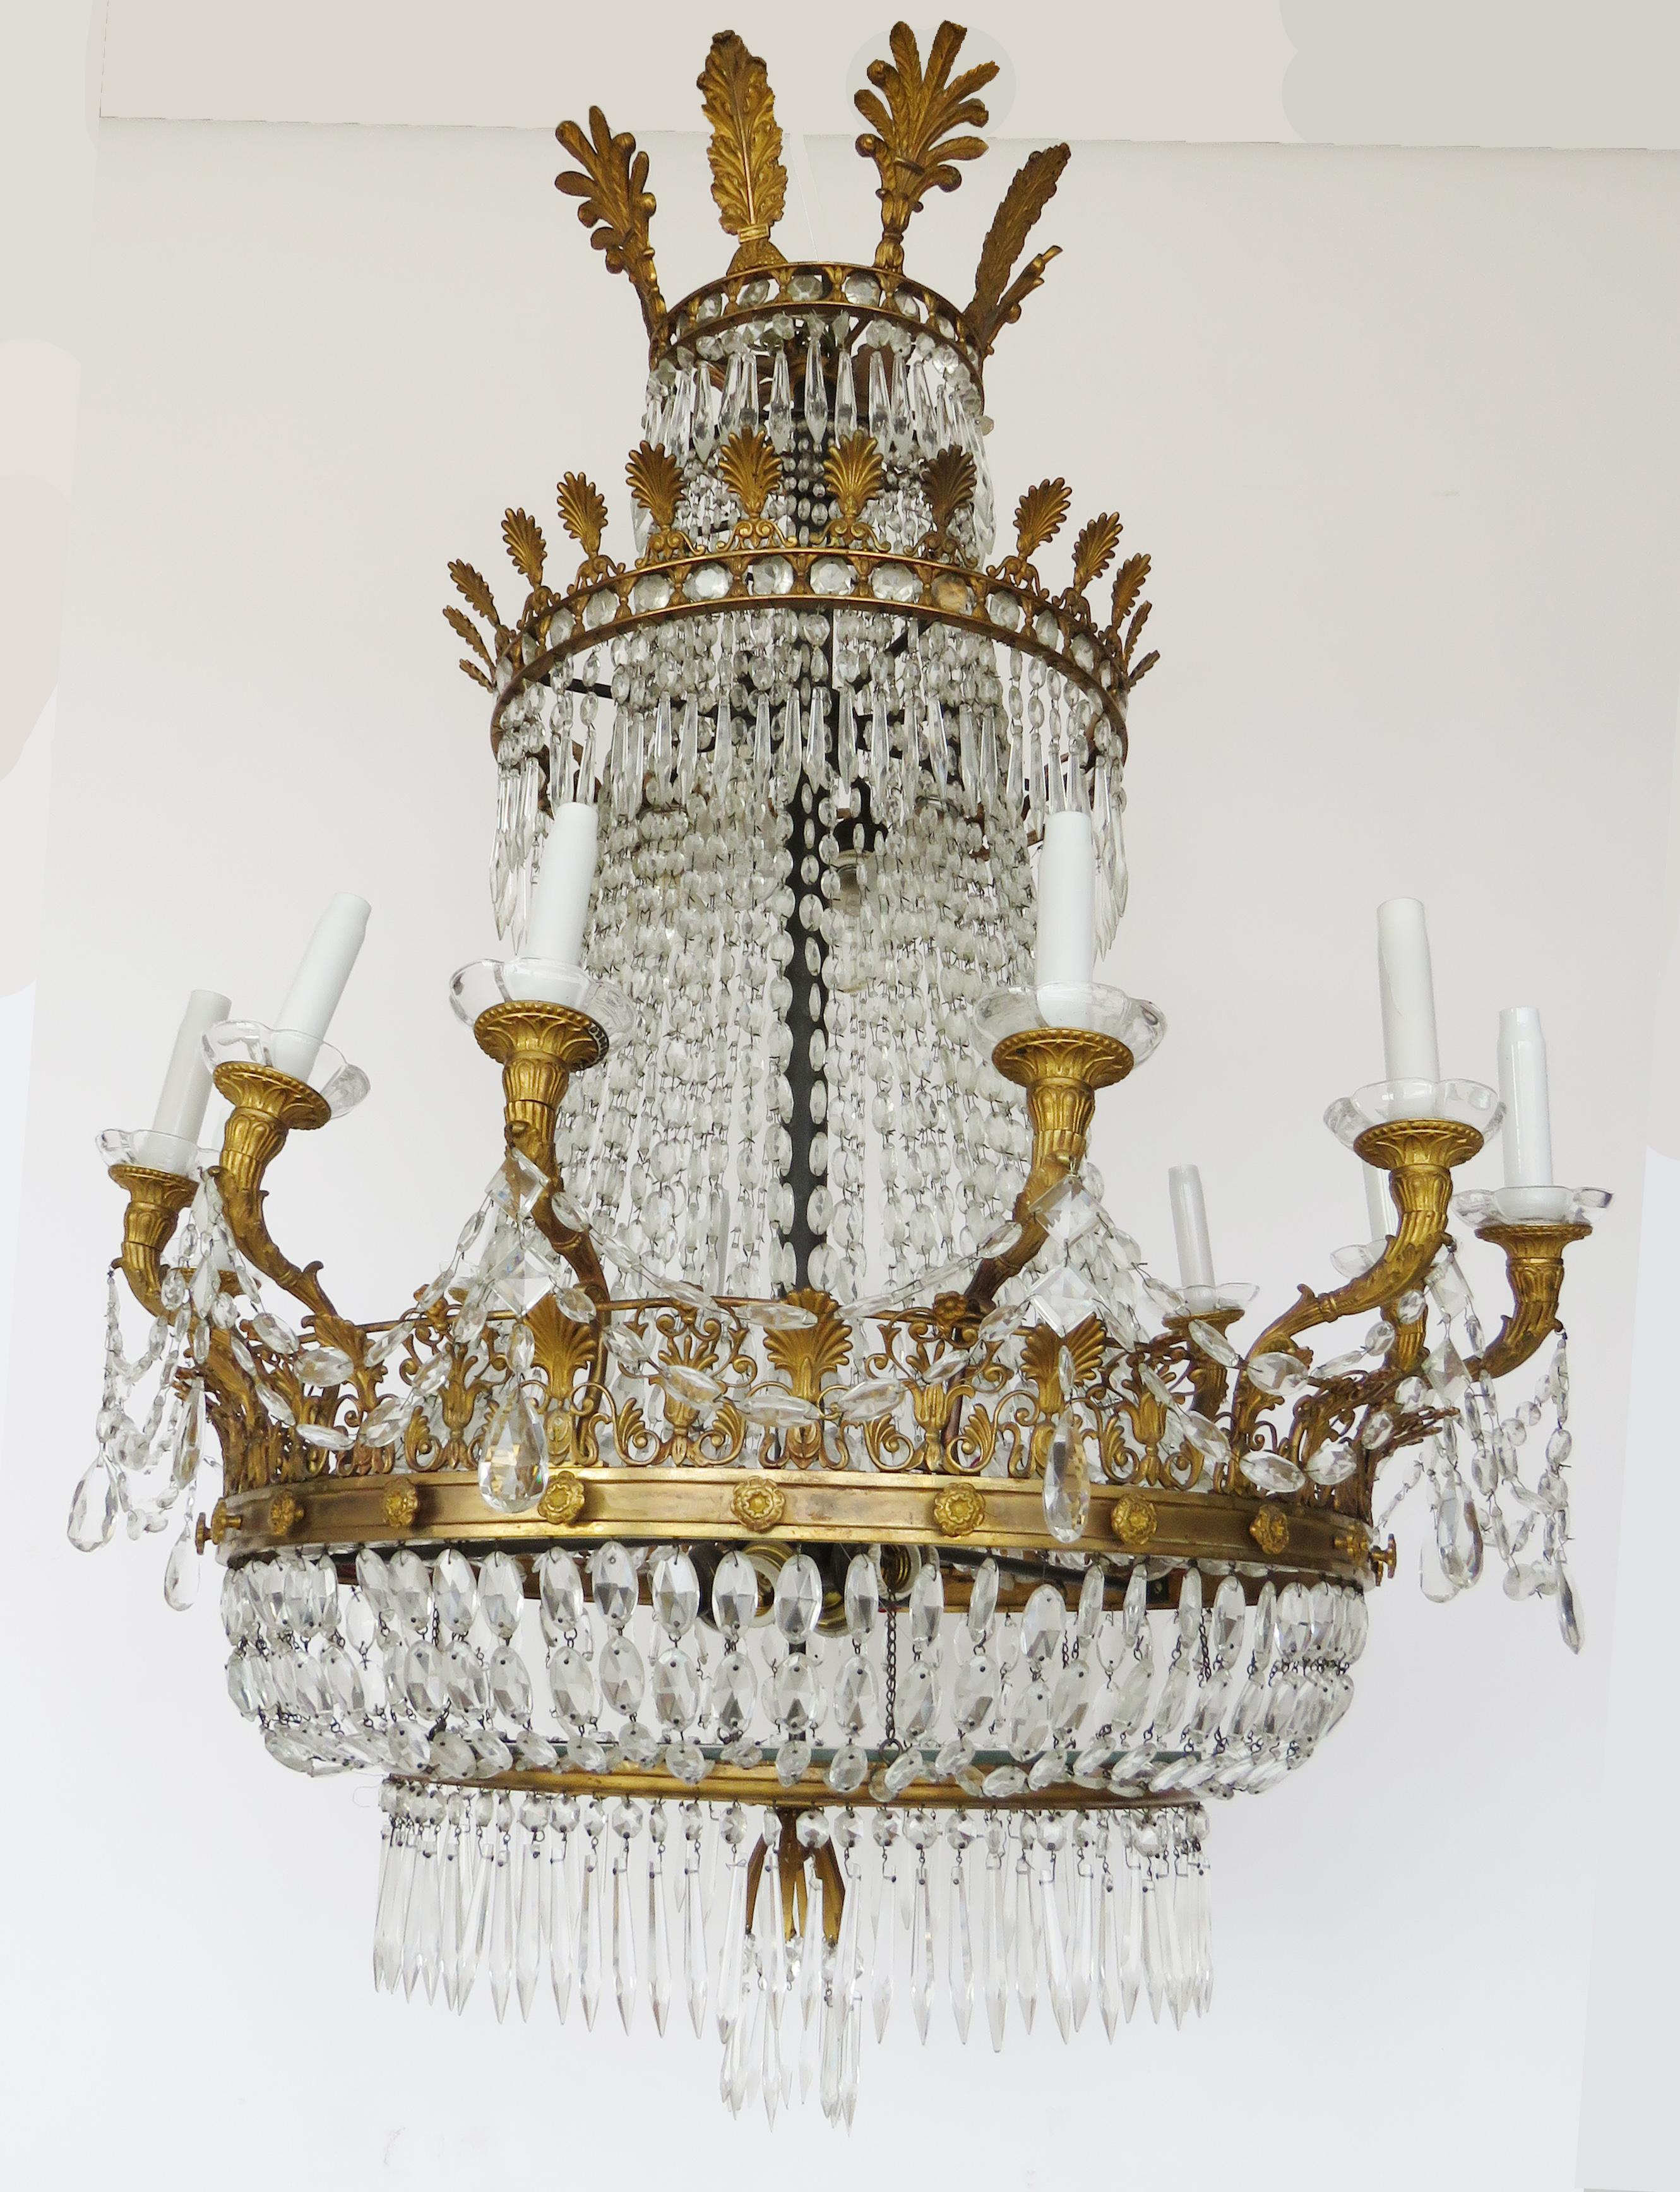 The gilt palmette cast corona over a ring suspended by faceted chains issuing palmettes hung with elongated tear drops and floriform candlecups the faceted chains intersecting the double crown